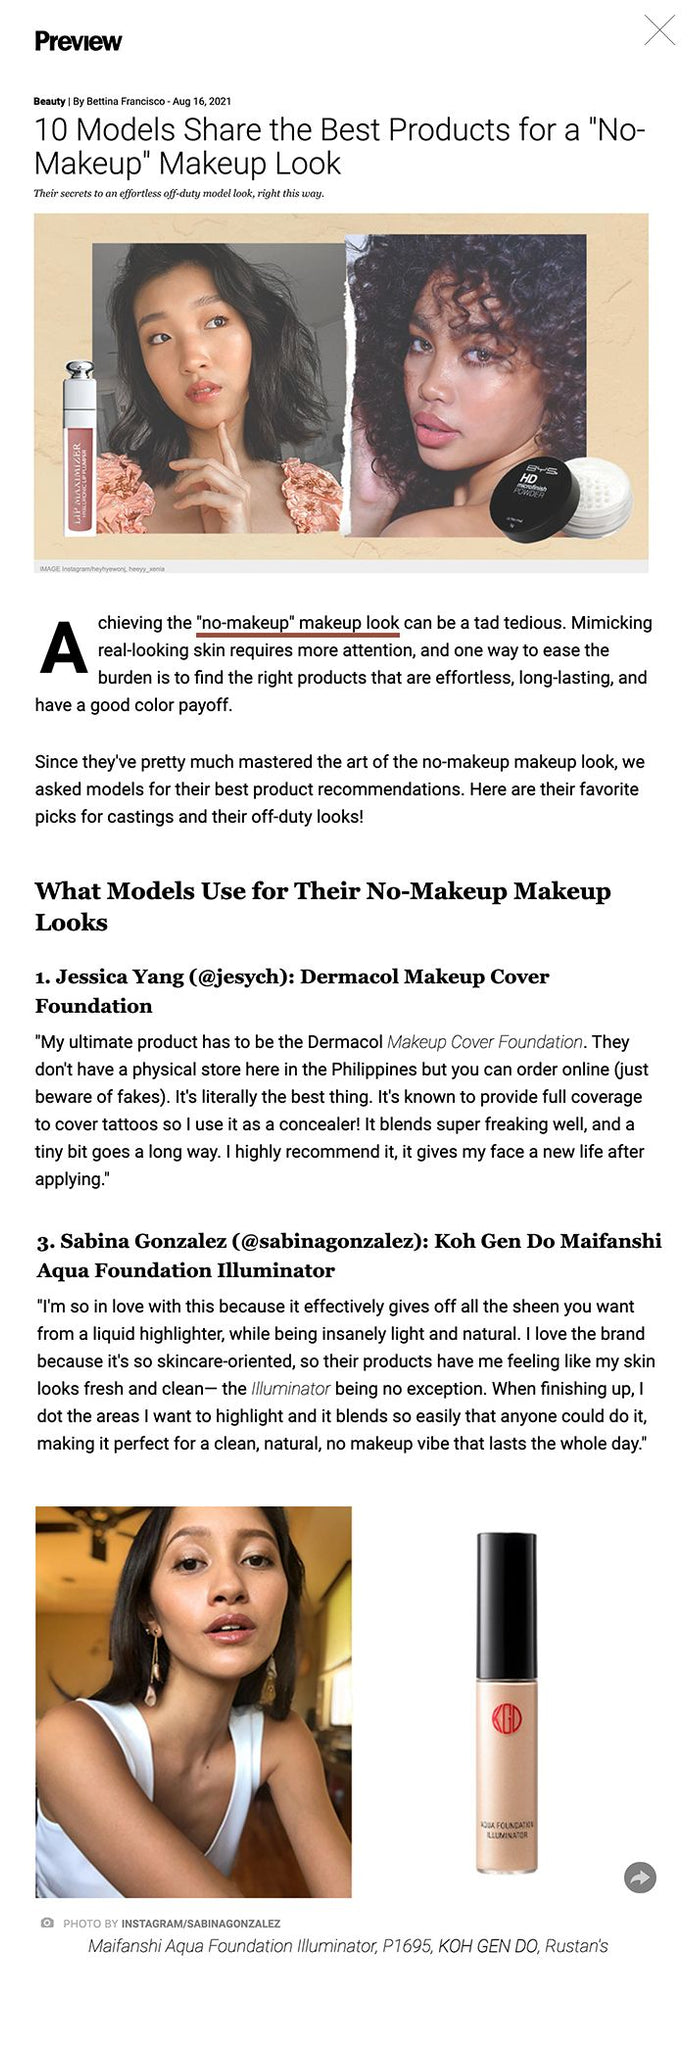 10 Models Share the Best Products for a "No-Makeup" Makeup Look Their secrets to an effortless off-duty model look, right this way.  10 Models Share the Best Products for a "No-Makeup" Makeup Look IMAGE Instagram/heyhyewonj, heeyy_xenia Shares  Share  Tweet  Comments Achieving the "no-makeup" makeup look can be a tad tedious. Mimicking real-looking skin requires more attention, and one way to ease the burden is to find the right products that are effortless, long-lasting, and have a good color payoff.  Since they've pretty much mastered the art of the no-makeup makeup look, we asked models for their best product recommendations. Here are their favorite picks for castings and their off-duty looks!  What Models Use for Their No-Makeup Makeup Looks 1. Jessica Yang (@jesych): Dermacol Makeup Cover Foundation "My ultimate product has to be the Dermacol Makeup Cover Foundation. They don't have a physical store here in the Philippines but you can order online (just beware of fakes). It's literally the best thing. It's known to provide full coverage to cover tattoos so I use it as a concealer! It blends super freaking well, and a tiny bit goes a long way. I highly recommend it, it gives my face a new life after applying."  ADVERTISEMENT - CONTINUE READING BELOW   ADVERTISING   model makeup essentials   PHOTO BY INSTAGRAM/JESYCH Makeup Cover Foundation, P690, DERMACOL, Lazada  2. Reins Mika (@reinsmika): Sunnies Face Face Glass in Nova "My go-to favorite product for is the Sunnies Face Face Glass in Nova. It's light on the skin and quickly gives you a dewy, glass-like finish. It's a model makeup must-have for me since it gives the illusion of higher cheekbones and a more natural look while accentuating your angles."  CONTINUE READING BELOW  RECOMMENDED VIDEOS  model makeup essentials   PHOTO BY INSTAGRAM/REINSMIKA Face Glass in Nova, P445, SUNNIES FACE, Lazada  3. Sabina Gonzalez (@sabinagonzalez): Koh Gen Do Maifanshi Aqua Foundation Illuminator "I'm so in love with this because it effectively gives off all the sheen you want from a liquid highlighter, while being insanely light and natural. I love the brand because it's so skincare-oriented, so their products have me feeling like my skin looks fresh and clean— the Illuminator being no exception. When finishing up, I dot the areas I want to highlight and it blends so easily that anyone could do it, making it perfect for a clean, natural, no makeup vibe that lasts the whole day."  ADVERTISEMENT - CONTINUE READING BELOW   model makeup essentials   PHOTO BY INSTAGRAM/SABINAGONZALEZ Maifanshi Aqua Foundation Illuminator, P1695, KOH GEN DO, Rustan's  4. Adela Mae Marshall (@adelamae): Issy & Co. Active Skin Tint "I don’t actually own a foundation because when I'm working, I wear so much makeup. So, my go-to product is Issy & Co.'s tinted moisturizer. It makes me feel like I’ve done something without covering up too much. It’s basically skincare."  ADVERTISEMENT - CONTINUE READING BELOW   model makeup essentials   PHOTO BY INSTAGRAM/ADELAMAE Active Skin Tint SPF 35, P474, ISSY & CO., Shopee  5. Jasmine Maierhofer (@jasmaierhofer): Sassy Lip and Cheek Tint "My favorite product to use for a no-makeup look is a lip & cheek tint from @sassyxbabe. It's a three-in-one [product] I use on my cheeks, lips and even on my eyes as an eyeshadow."  ADVERTISEMENT - CONTINUE READING BELOW   model makeup essentials   PHOTO BY INSTAGRAM/JASMAIERHOFER Lip and Cheek Gel Tint, P159, SASSY, instagram.com/sassyxbabe  6. Hye Won Jang (@heyhyewonj): Dior Addict Lip Maximizer Plumping Gloss "For a no-makeup look, the Dior Addict Lip Maximizer Plumping Gloss adds the perfect finishing touch that makes me feel ready for the day."  model makeup essentials   PHOTO BY INSTAGRAM/HEYHYEWONJ ADVERTISEMENT - CONTINUE READING BELOW   Addict Lip Maximizer Plumping Gloss, P2409, DIOR, Zalora  7. Xenia Santos (@heeyy_xenia): BYS HD Micro Finish Powder "My holy grail powder is the BYS HD Micro Finish Powder. It's not like any other powder because its micro finish blurs your skin and makes you look flawless but still very natural. And, it does hold your base makeup."  model makeup essentials   PHOTO BY INSTAGRAM/HEEYY_XENIA ADVERTISEMENT - CONTINUE READING BELOW   HD Micro Finish Powder, P899, BYS, Shopee  8. Erla Garcia (@erla.rain): Colourette Colourtint in Emma "My favorite product for a no-makeup look is Colourette's multi-use tint in Emma. Not only do I use it on my lips, but I also use it on my eyes and cheeks to give me that long-lasting fresh look. As a morena, this product blends really well on my skin and stays longer than I expected. I also use this on my castings whenever I have no time to do a full make up. Highly recommend this to everyone!"  model makeup essentials   PHOTO BY INSTAGRAM/ERLA.RAIN ADVERTISEMENT - CONTINUE READING BELOW   Colourtint in Emma, P299, COLOURETTE, Shopee  9. Taki Yoneyama (@oiitstaki): The Ordinary Serum Foundation "The key to a no makeup look is to have a good base. This product just does that! It has a light-medium coverage and a semi-matte finish that gives you glowy, healthy-looking skin!"  model makeup essentials   PHOTO BY INSTAGRAM/OIITSTAKI ADVERTISEMENT - CONTINUE READING BELOW   Serum Foundation, P575, THE ORDINARY, Lazada  10. Agie Stoeckel (@agiestoeckel): Sunnies Face Lifebrow Duo in Ash Brown "I love using Lifebrow Duo in Ash Brown from Sunnies Face. It draws on fine lines on my brows which gives a fuller and natural look since I have sparse brows. I always [reach for] this because it's easy to use."  model makeup essentials   PHOTO BY INSTAGRAM/AGIESTOECKEL ADVERTISEMENT - CONTINUE READING BELOW   Lifebrow Duo in Ash Brown, P595, SUNNIES FACE, Lazada  Preview is now on Quento! Click here to download the app for iOS and Android and enjoy more articles and videos from Preview and your favorite websites!  Related Stories from Preview.ph 11 Models Reveal Their Holy Grail Products For Clear, Glowing Skin  11 Models Reveal Their Holy Grail Products for Clear, Glowing Skin How To Do Natural-looking Feathery Brows, According To Models  How to Do Natural-Looking Feathery Brows, According to Models The Best Nude Lipsticks For All Skin Tones, According To Models  The Best Nude Lipsticks for All Skin Tones, According to Models We Asked 10 Models To Reveal Their Signature Scents  We Asked 10 Models to Reveal Their Signature Scents Hey, Preview readers! Follow us on Facebook, Instagram, YouTube, Tiktok, and Twitter to stay up to speed on all things trendy and creative. We’ll curate the most stylish feed for you!  Shares  Share  Tweet  Comments READ MORE ON THIS TOPIC Model, makeup, Models, Jessica Yang, no-makeup look, Sabina Gonzalez, influencer, Jasmine Maierhofer, Hye Won Jang, local influencer, adela-mae marshall, influencer survey, taki yoneyama, con-00193, Agie Stoeckel, reins mika, affiliate, erla garcia, preview creative collective, xenia santos,